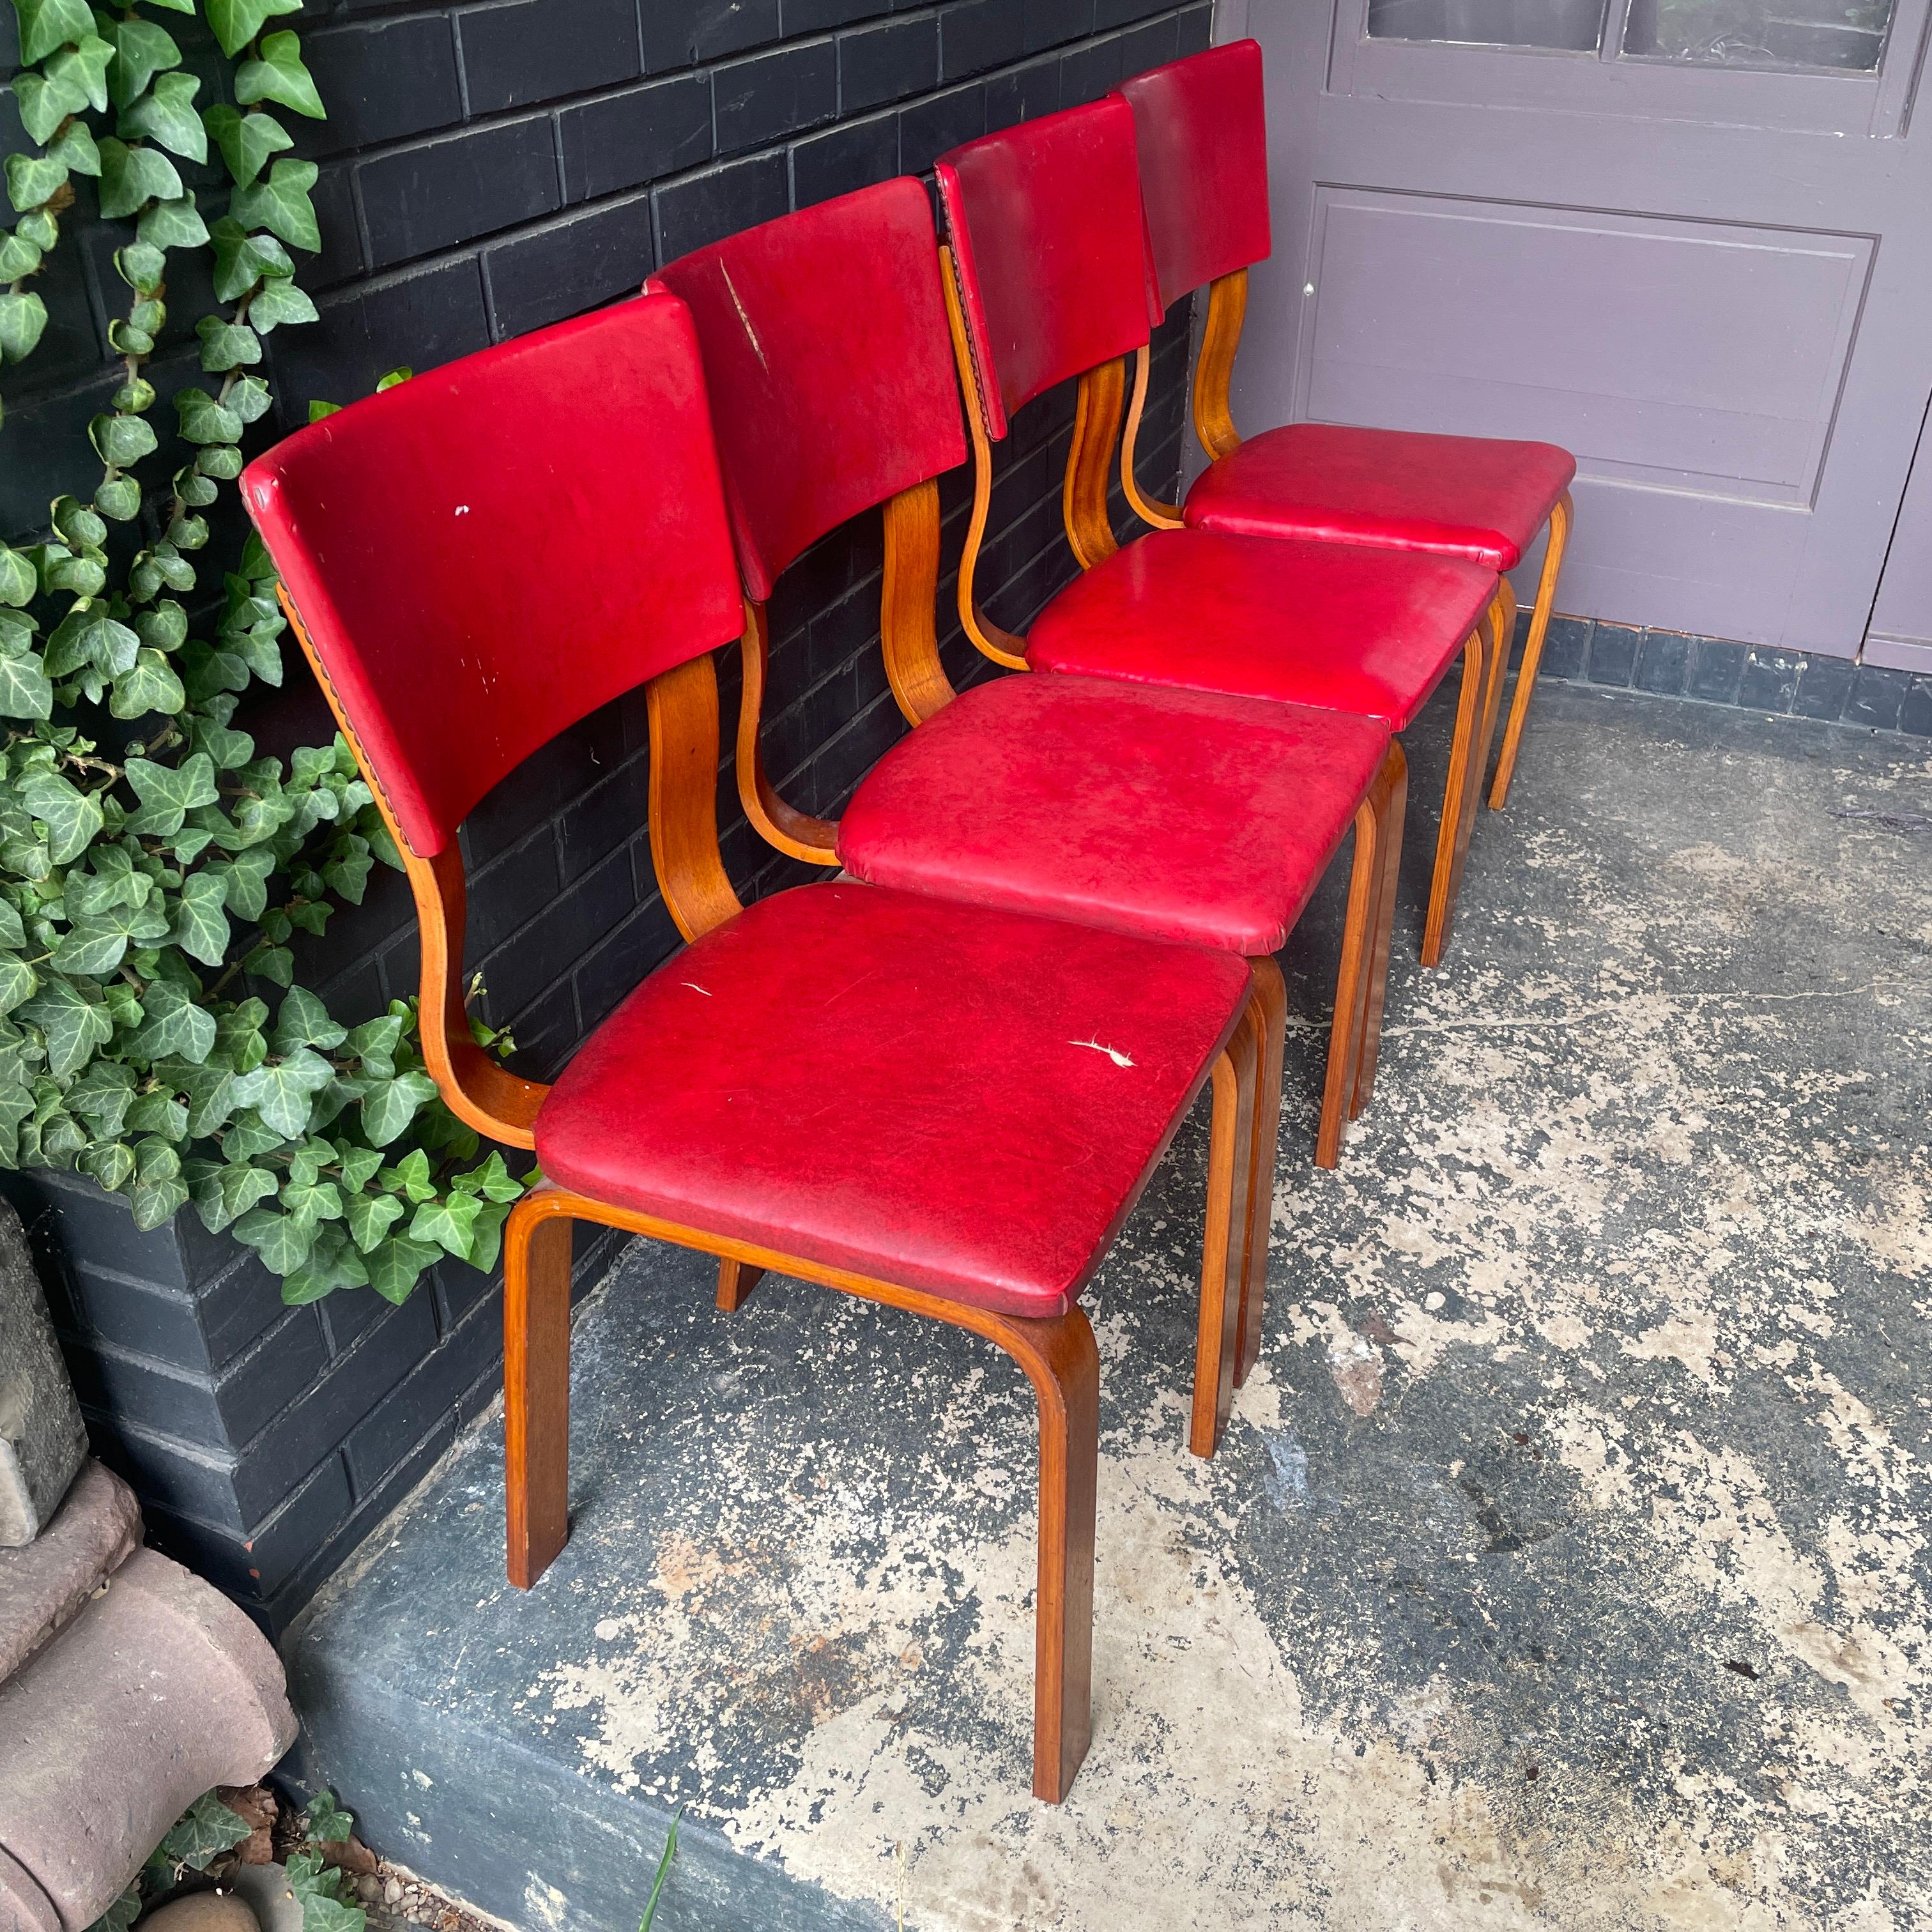 These are 4 all original chairs, and are presented in unrestored condition. These will need to be recovered two chairs have rips to the very old vinyl coverings. Reminiscent of the famous Alvar Aalto bentwood work of the same period.